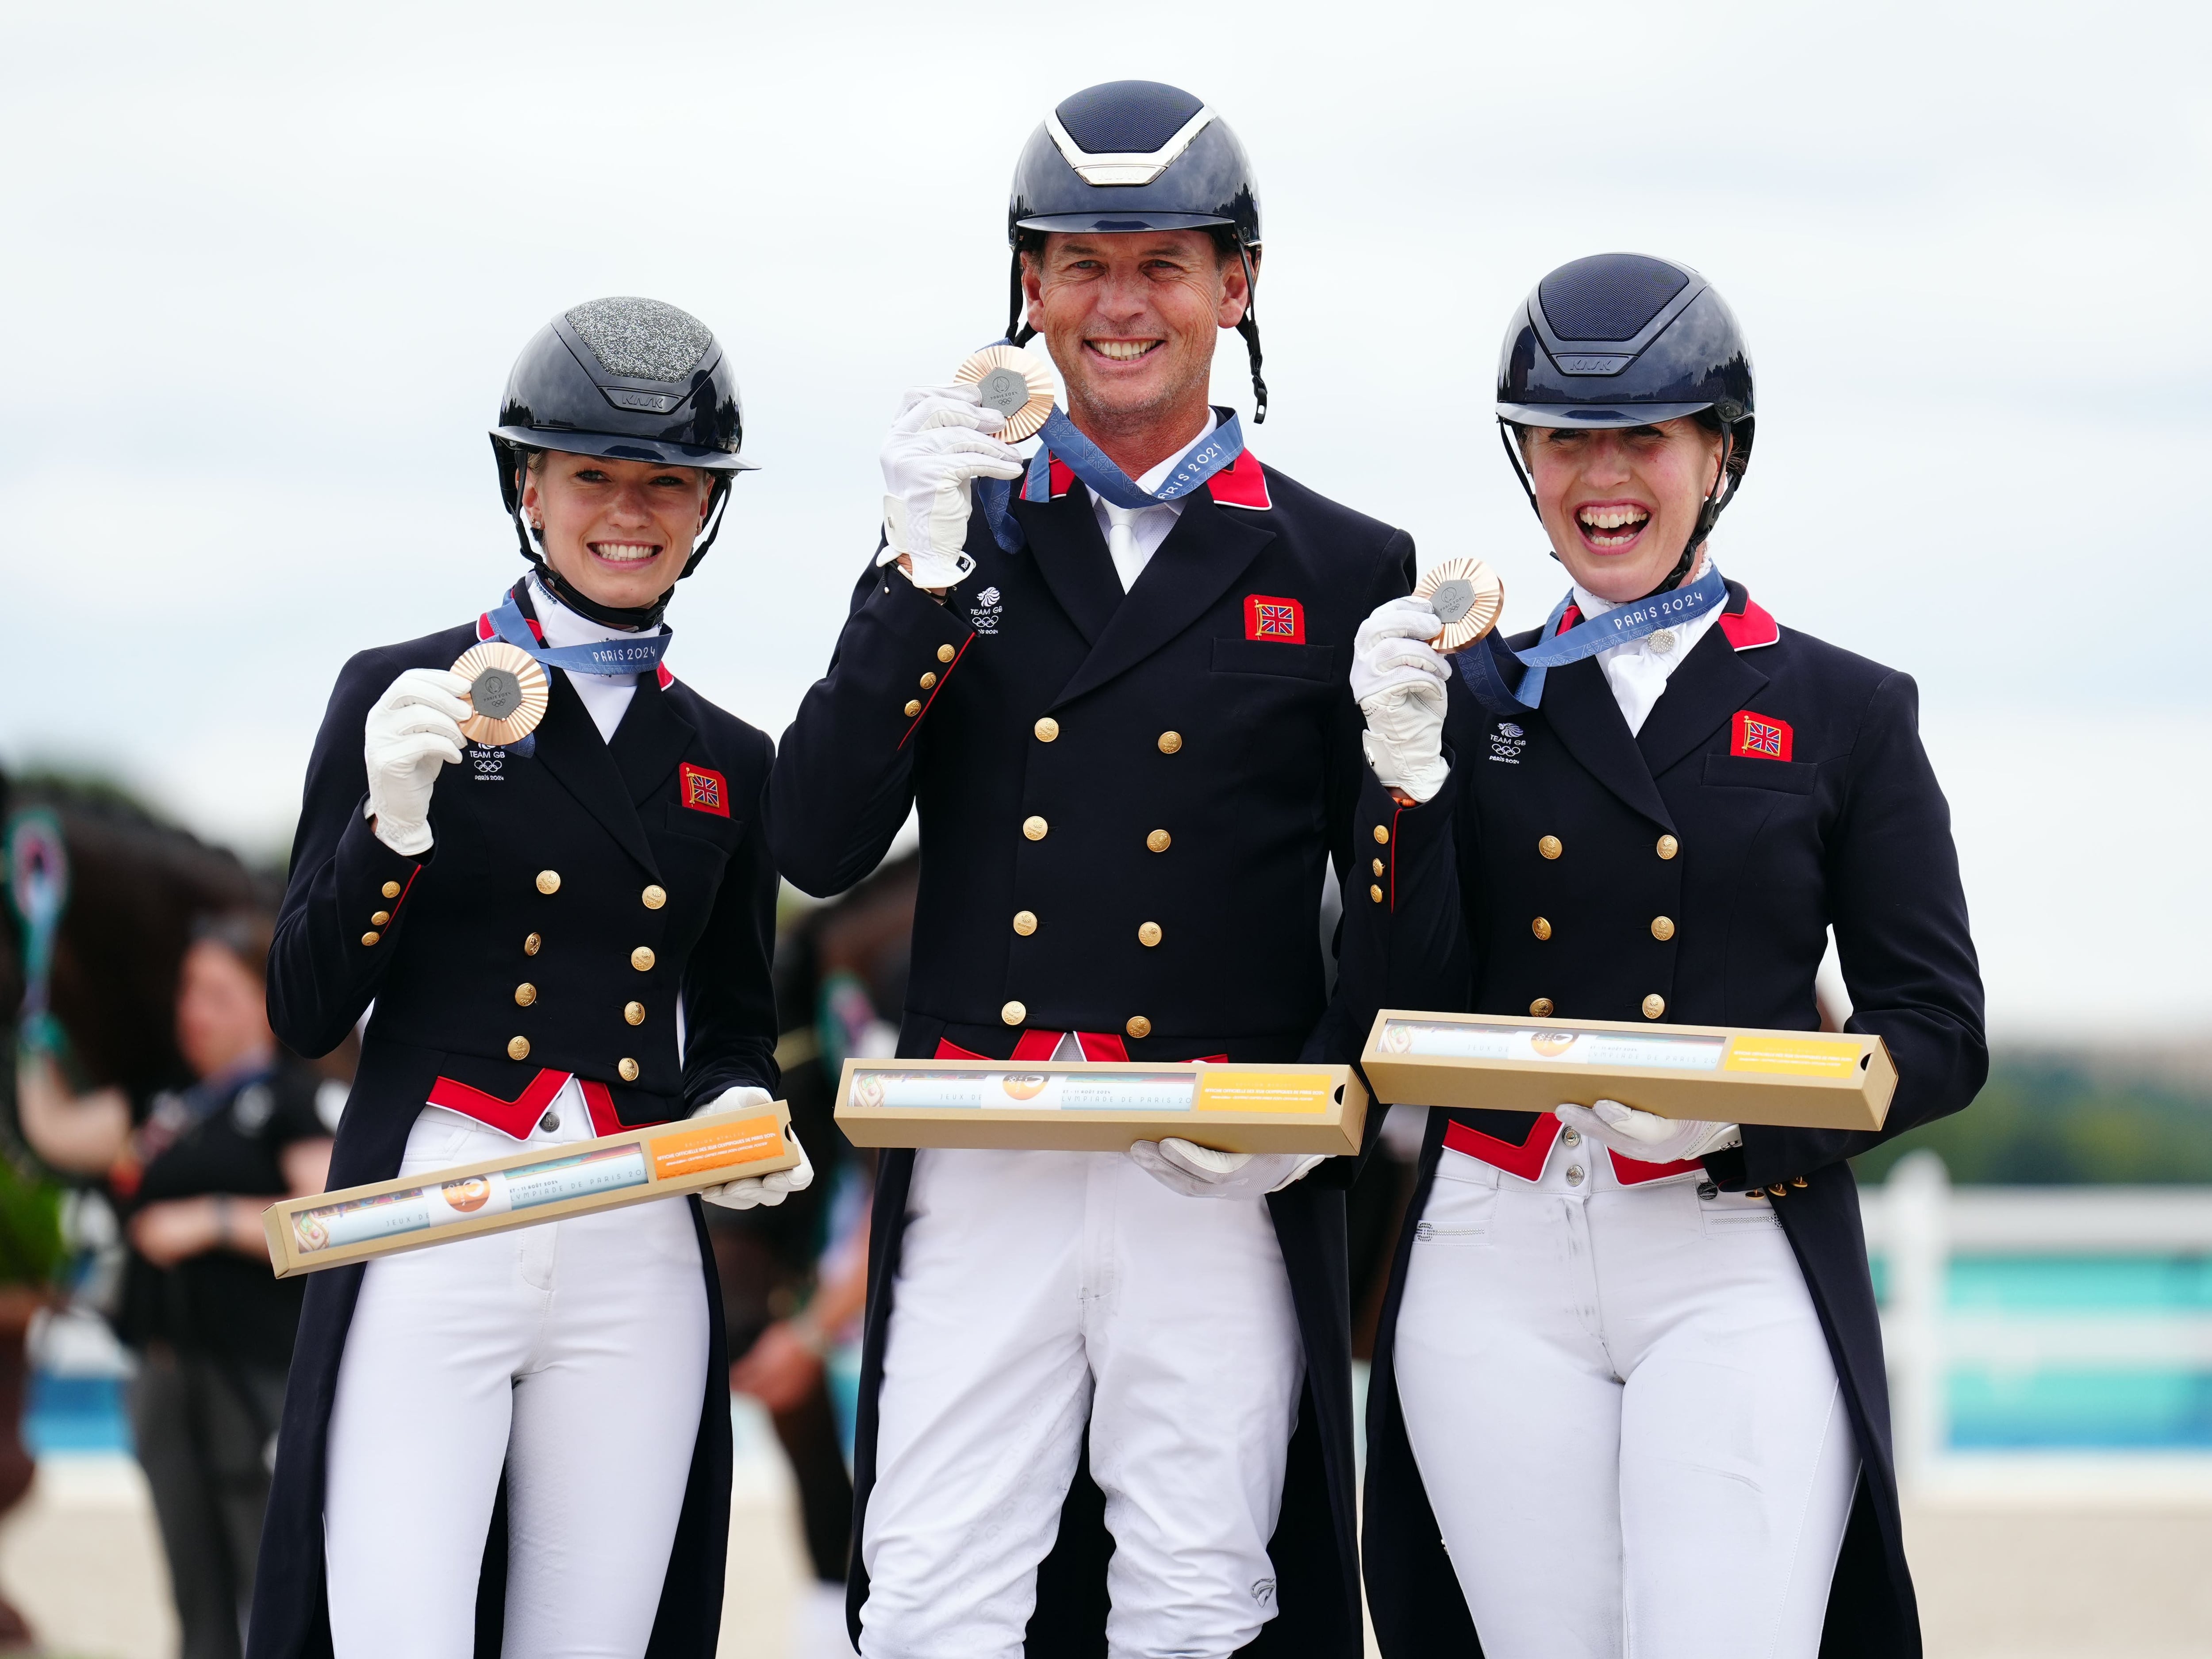 Carl Hester hints at retirement after a challenging week ends with medal success